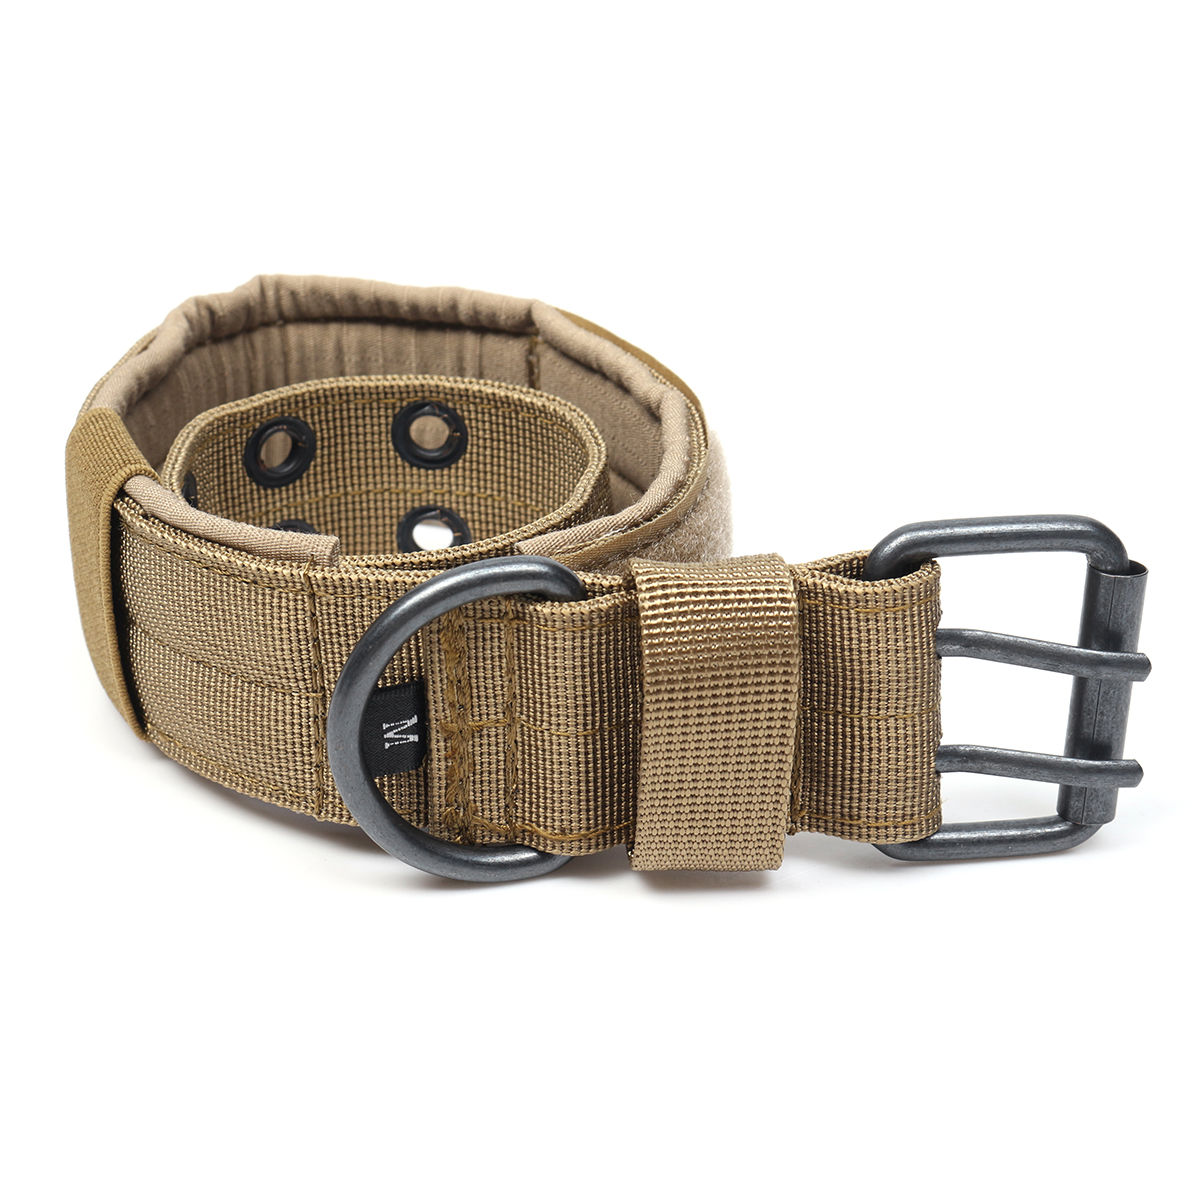 Adjustable-Training-Dog-Collar-Nylon-Tactical-Dog-Collar-Military-With-Metal-D-Ring-Buckle-1366535-6